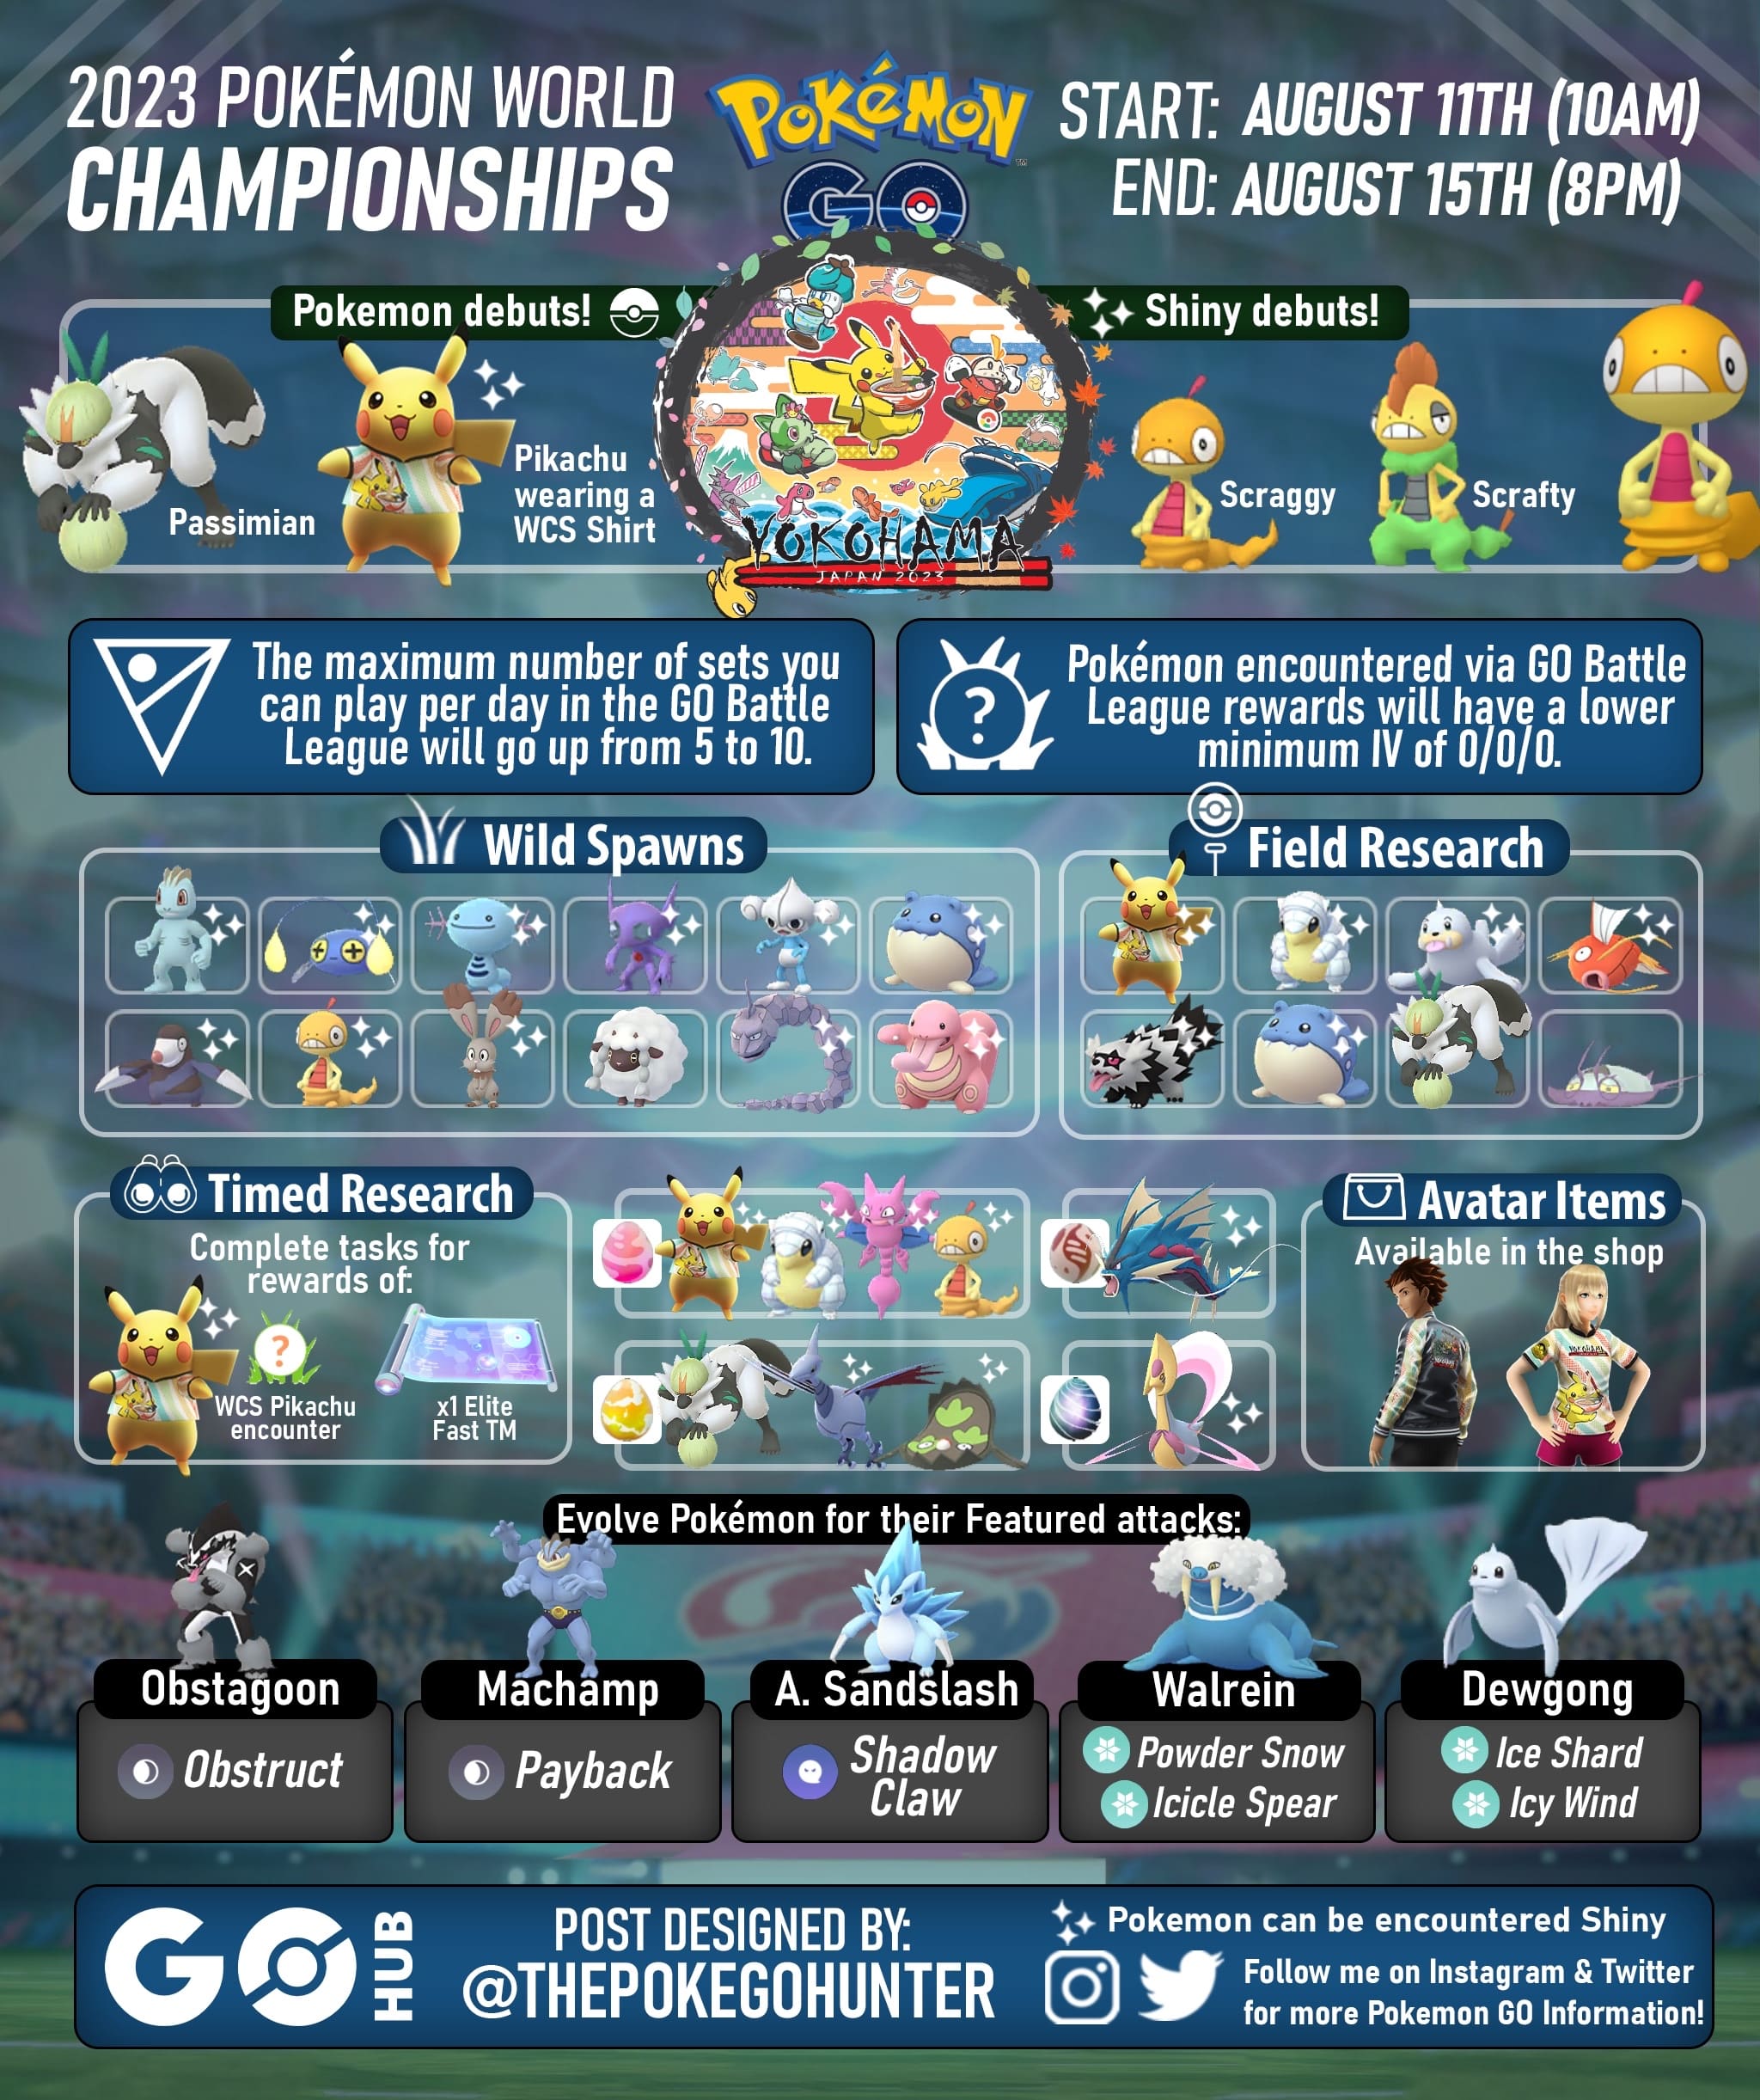 Still catching 'em all: why the Pokémon World Championships are bigger than  ever, Games